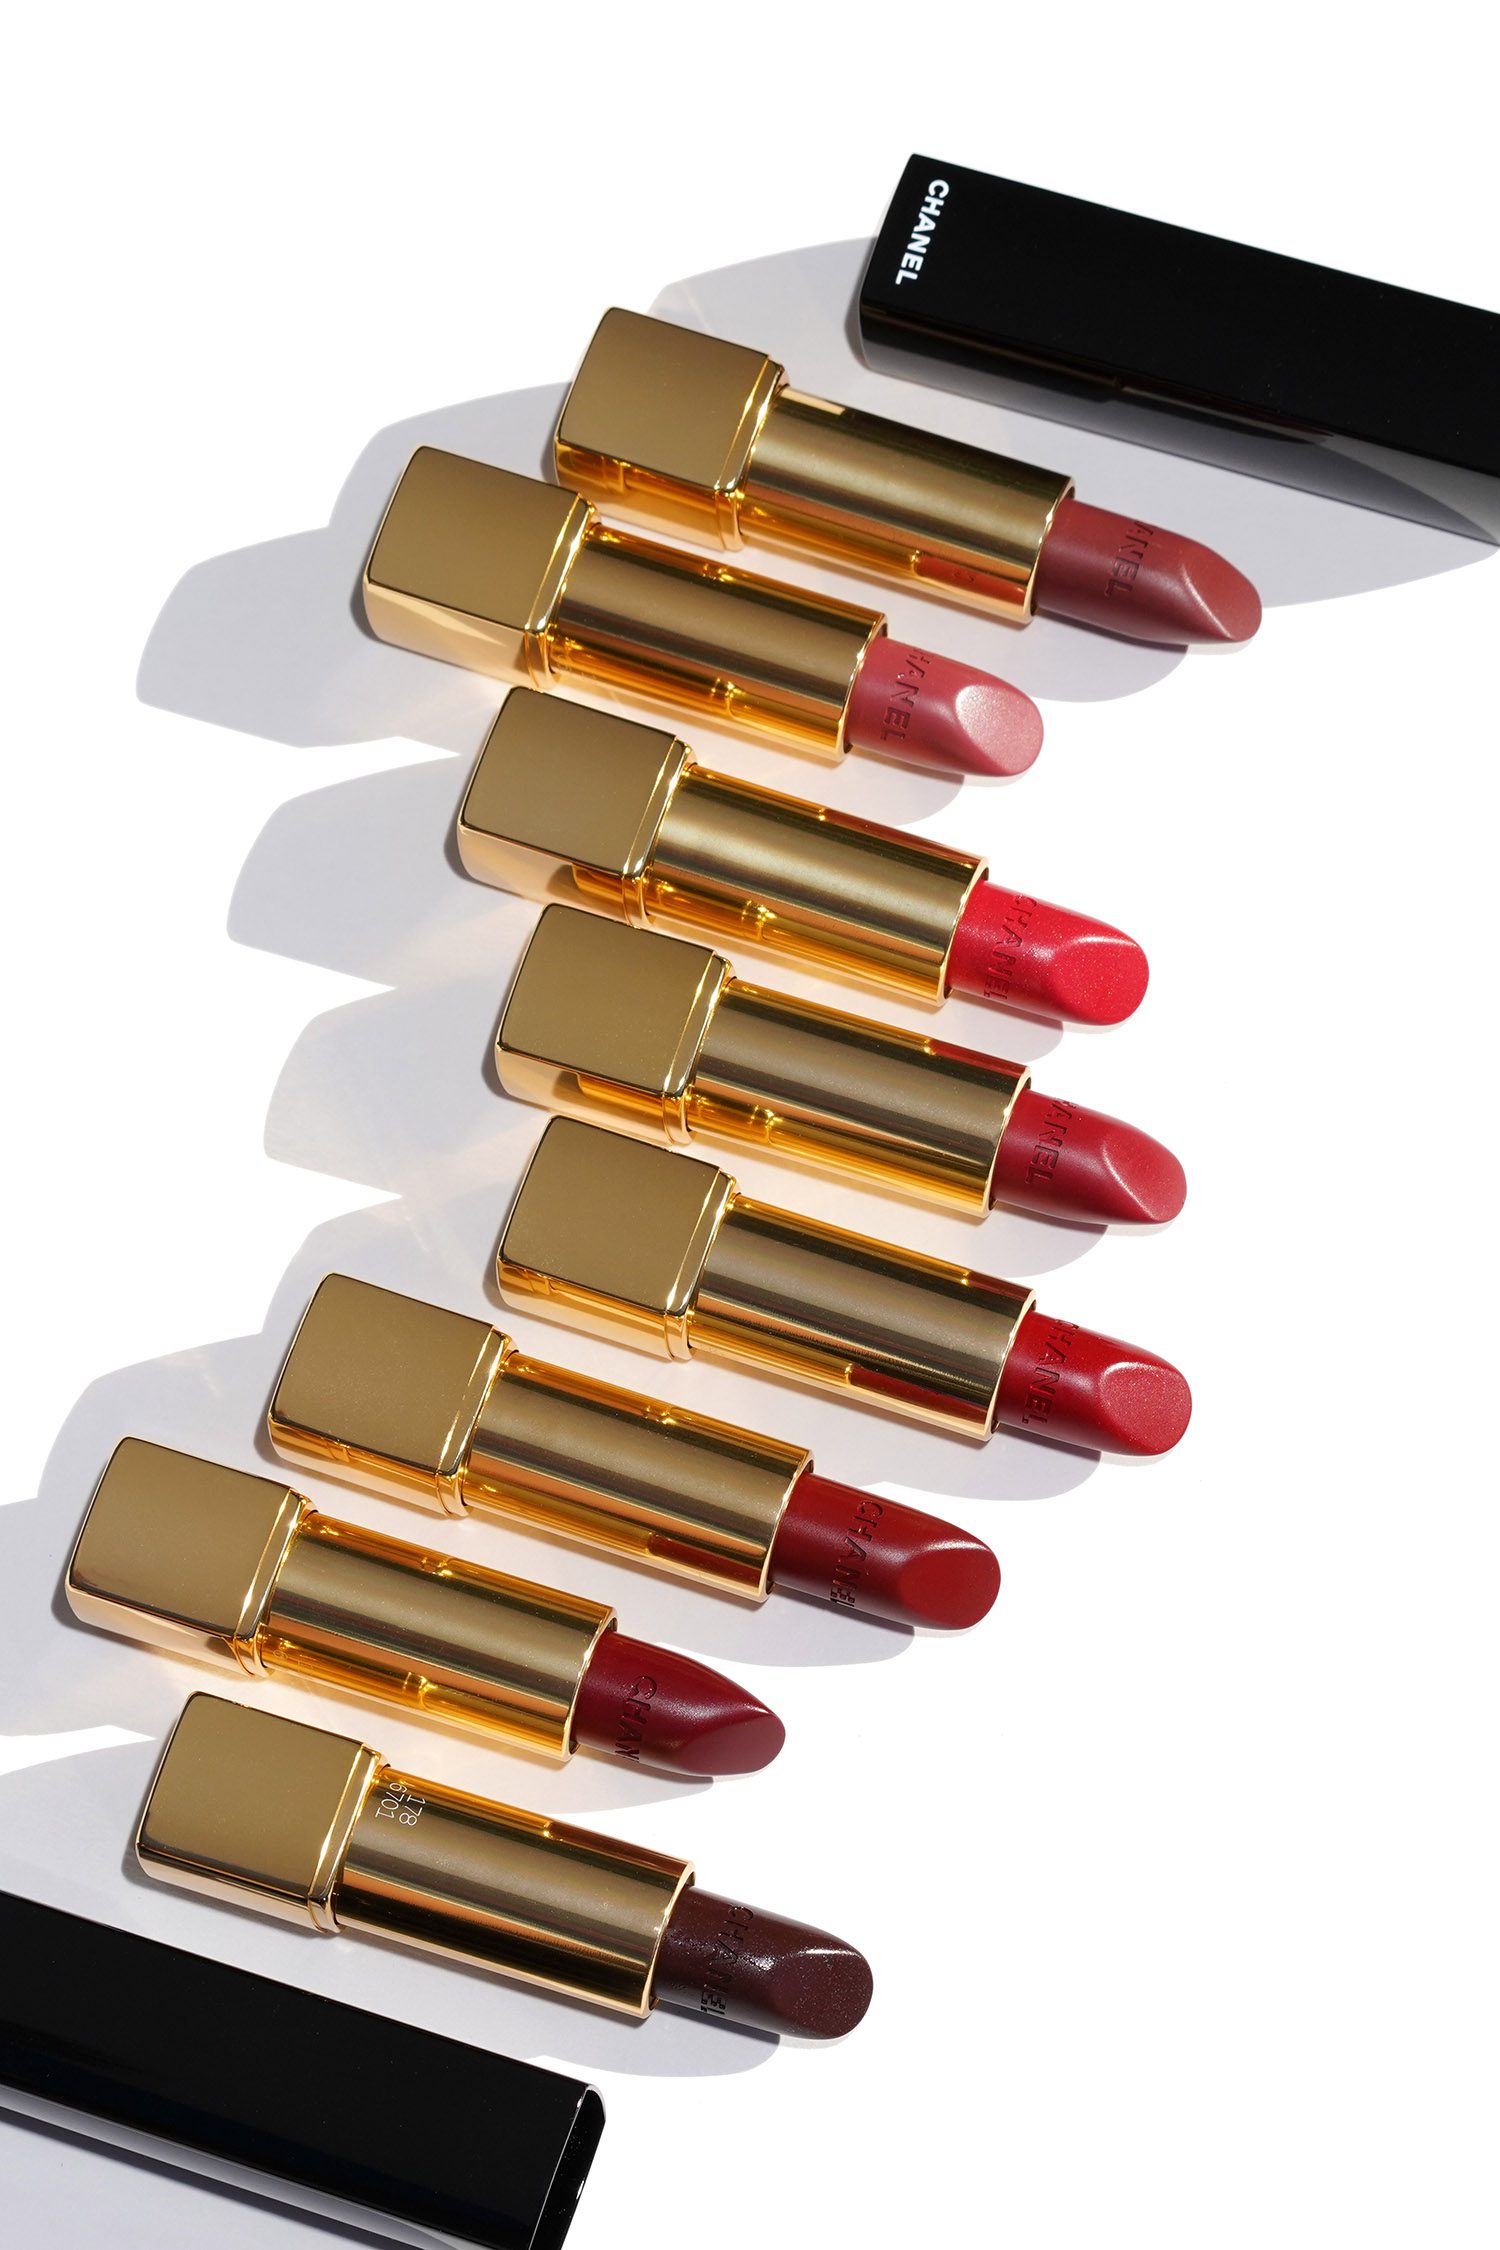 Chanel Rouge Allure Lip Colours for Fall 2022